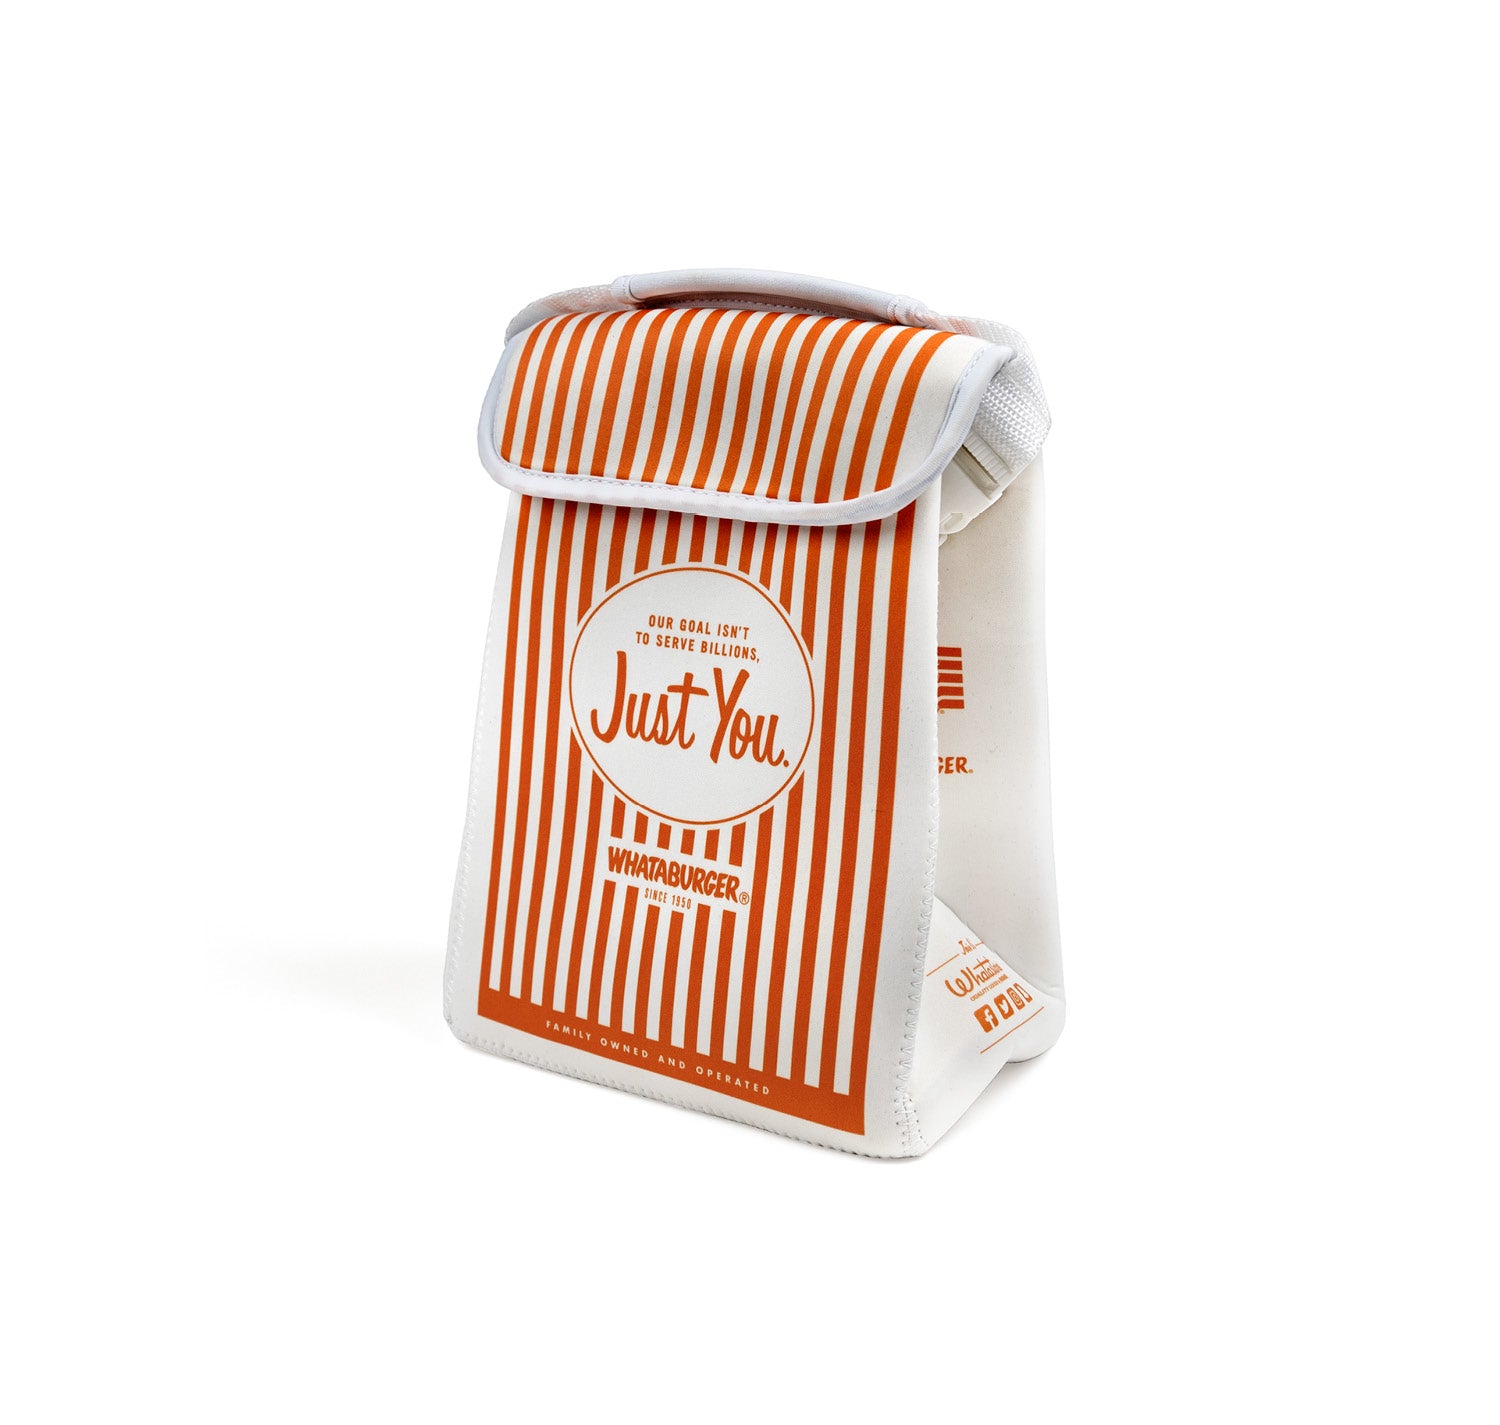 WHITE LUNCH BAG – In-N-Out Burger Company Store